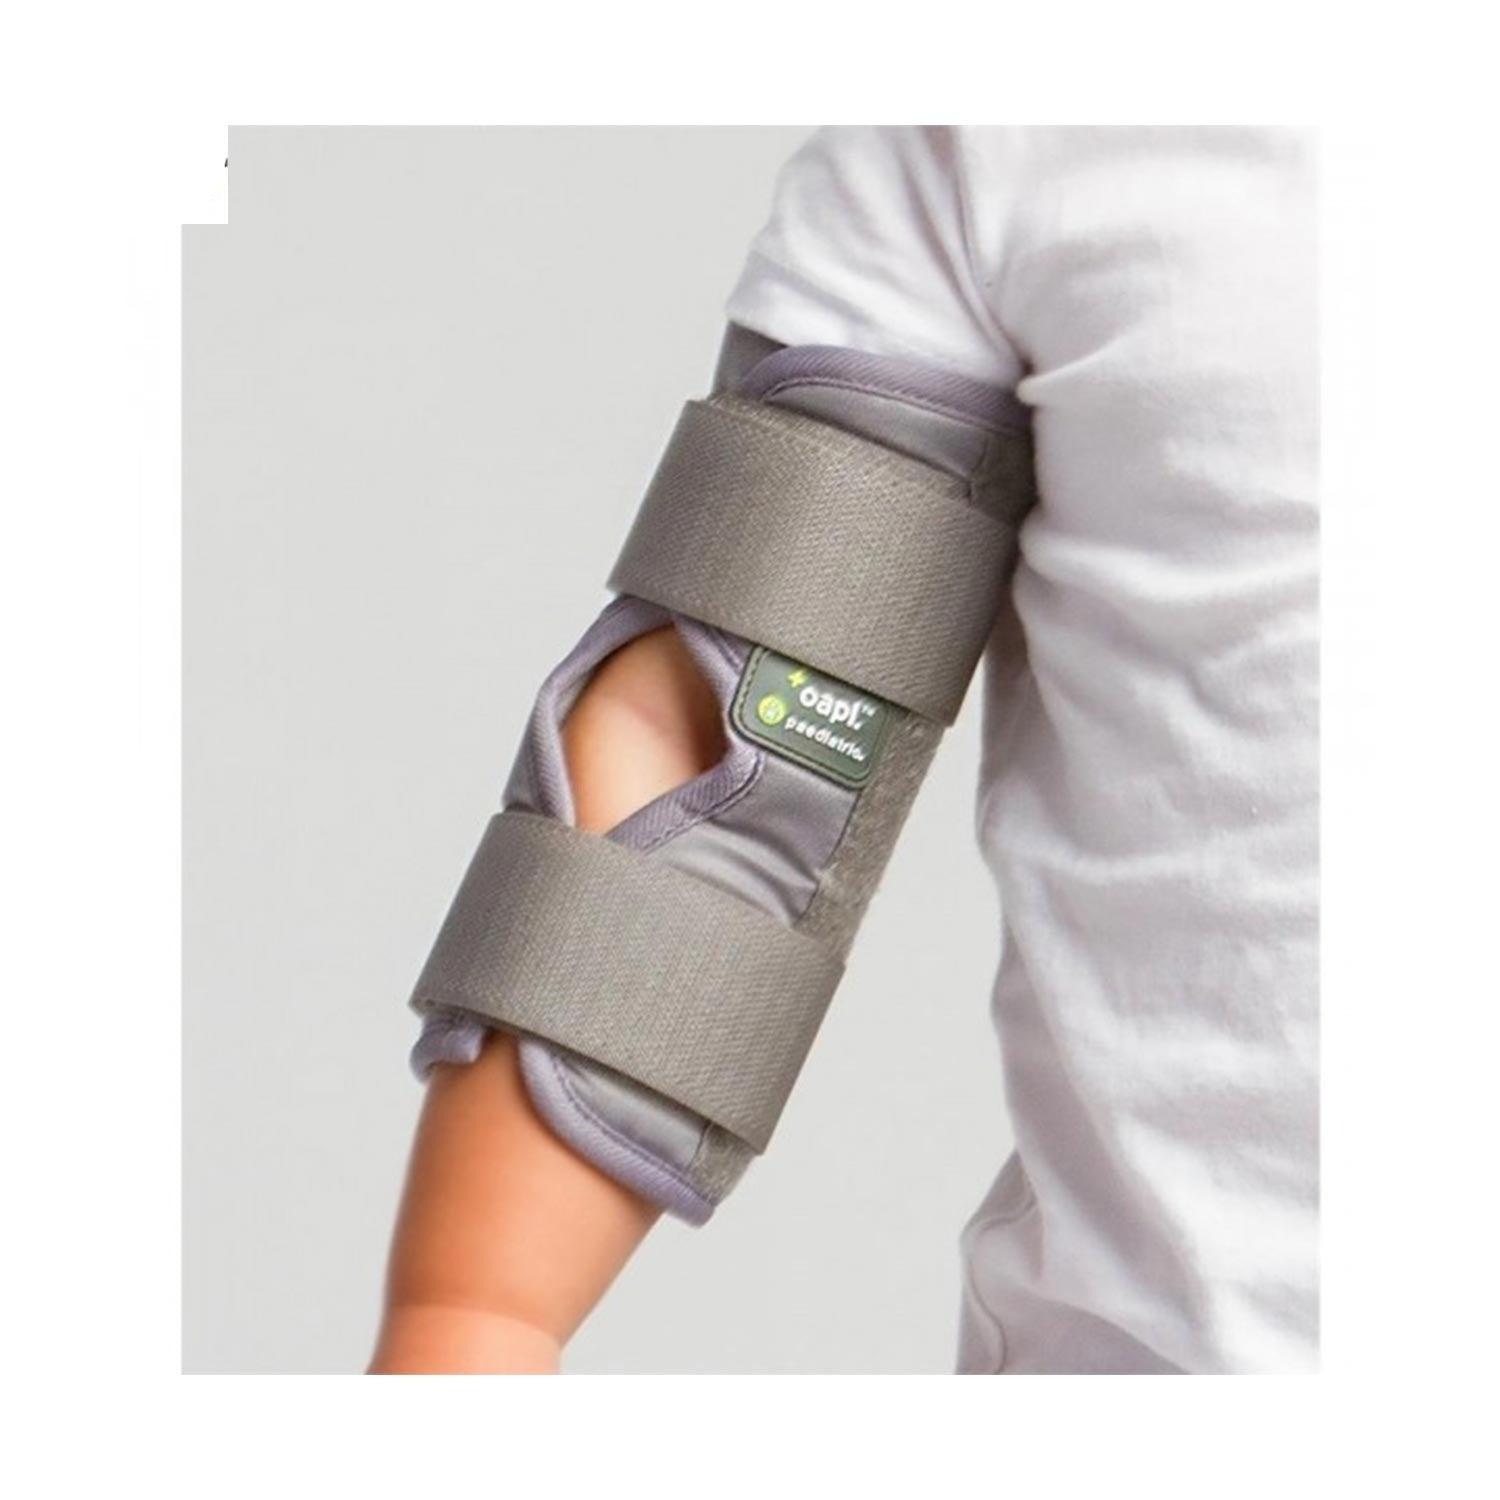 Pediatric Knee/Elbow Immobilizer – Secure Support for Healing - Anjelstore 